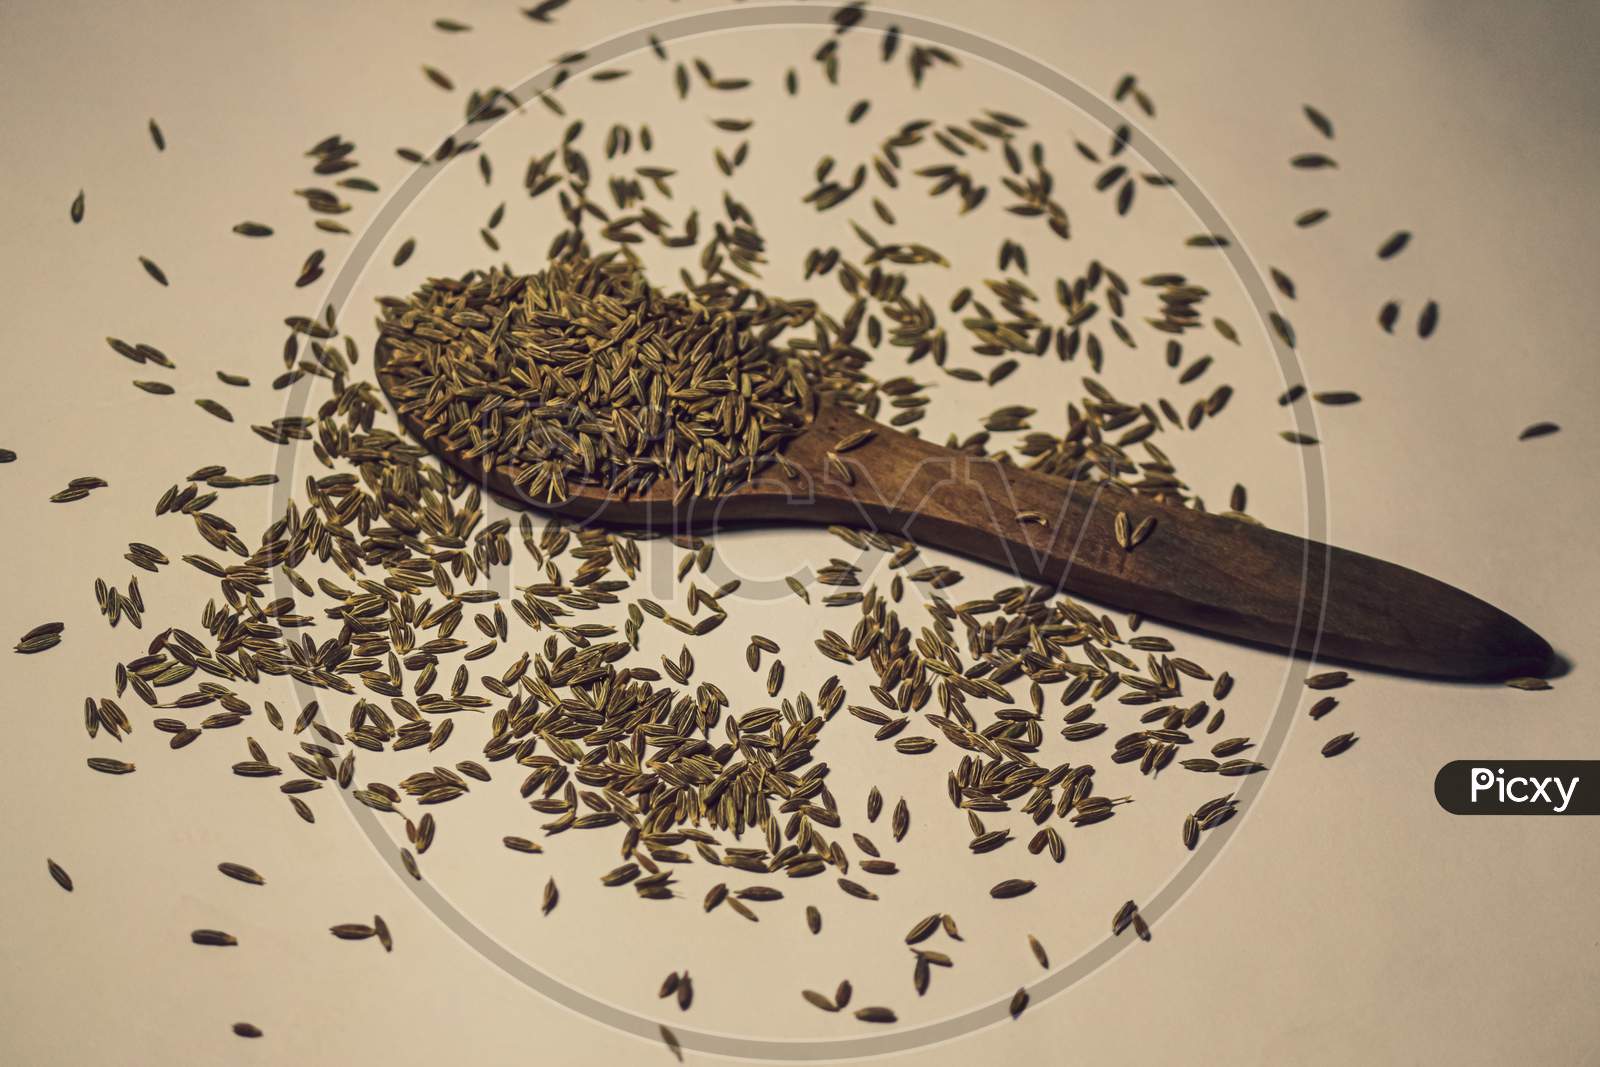 A spoon of full of healthy tasty beneficial cumin seeds